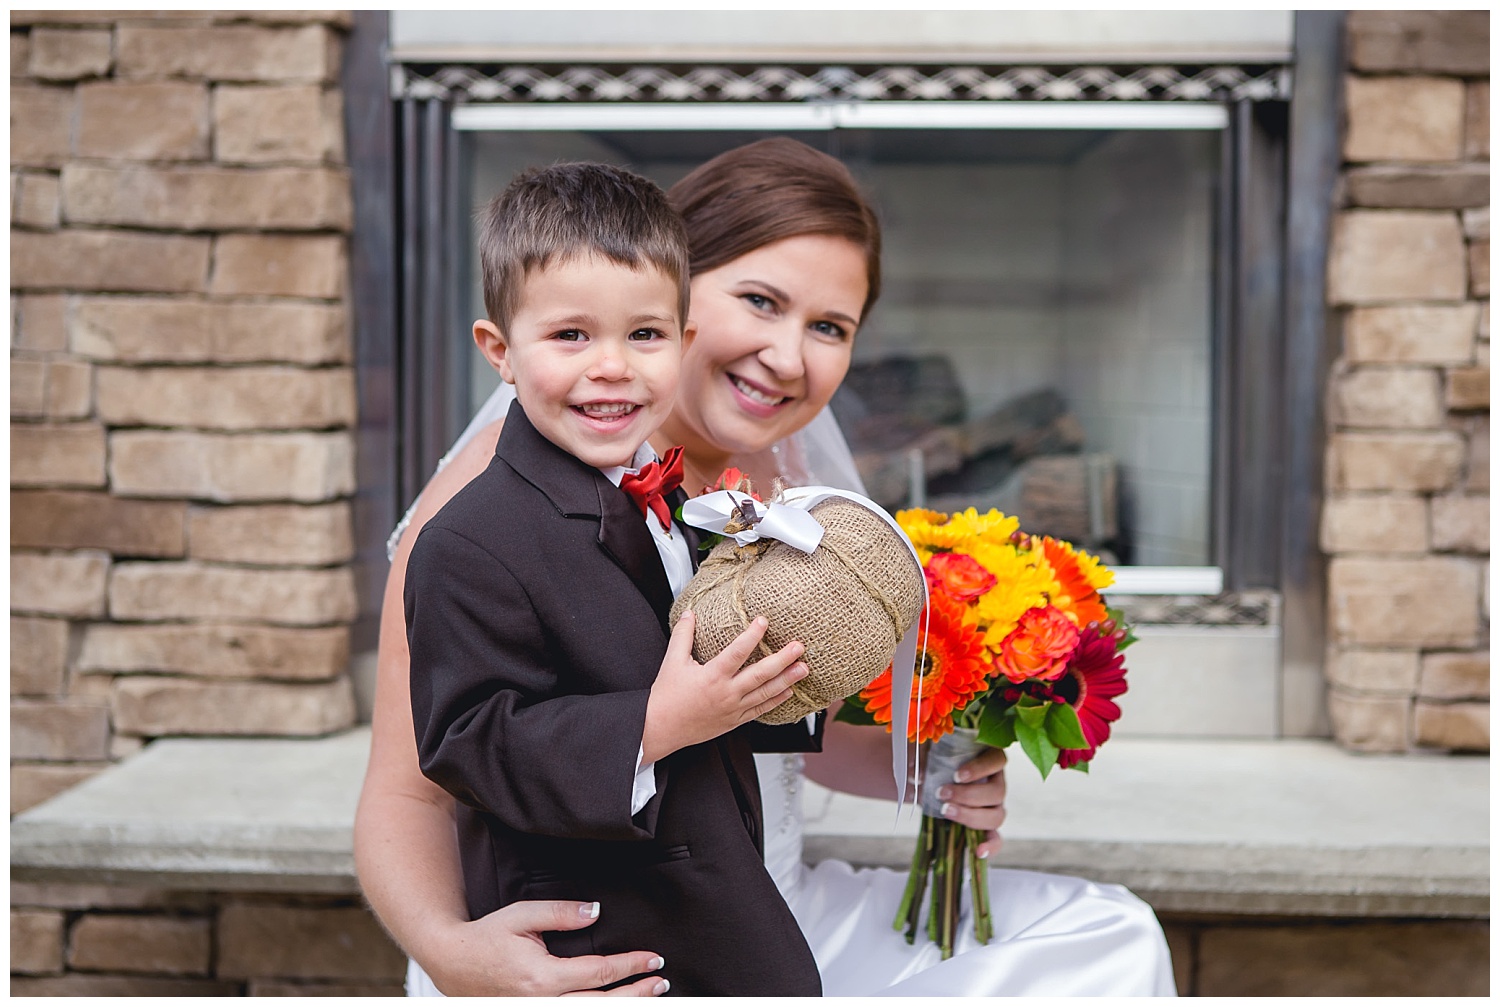 bride with ring bearer